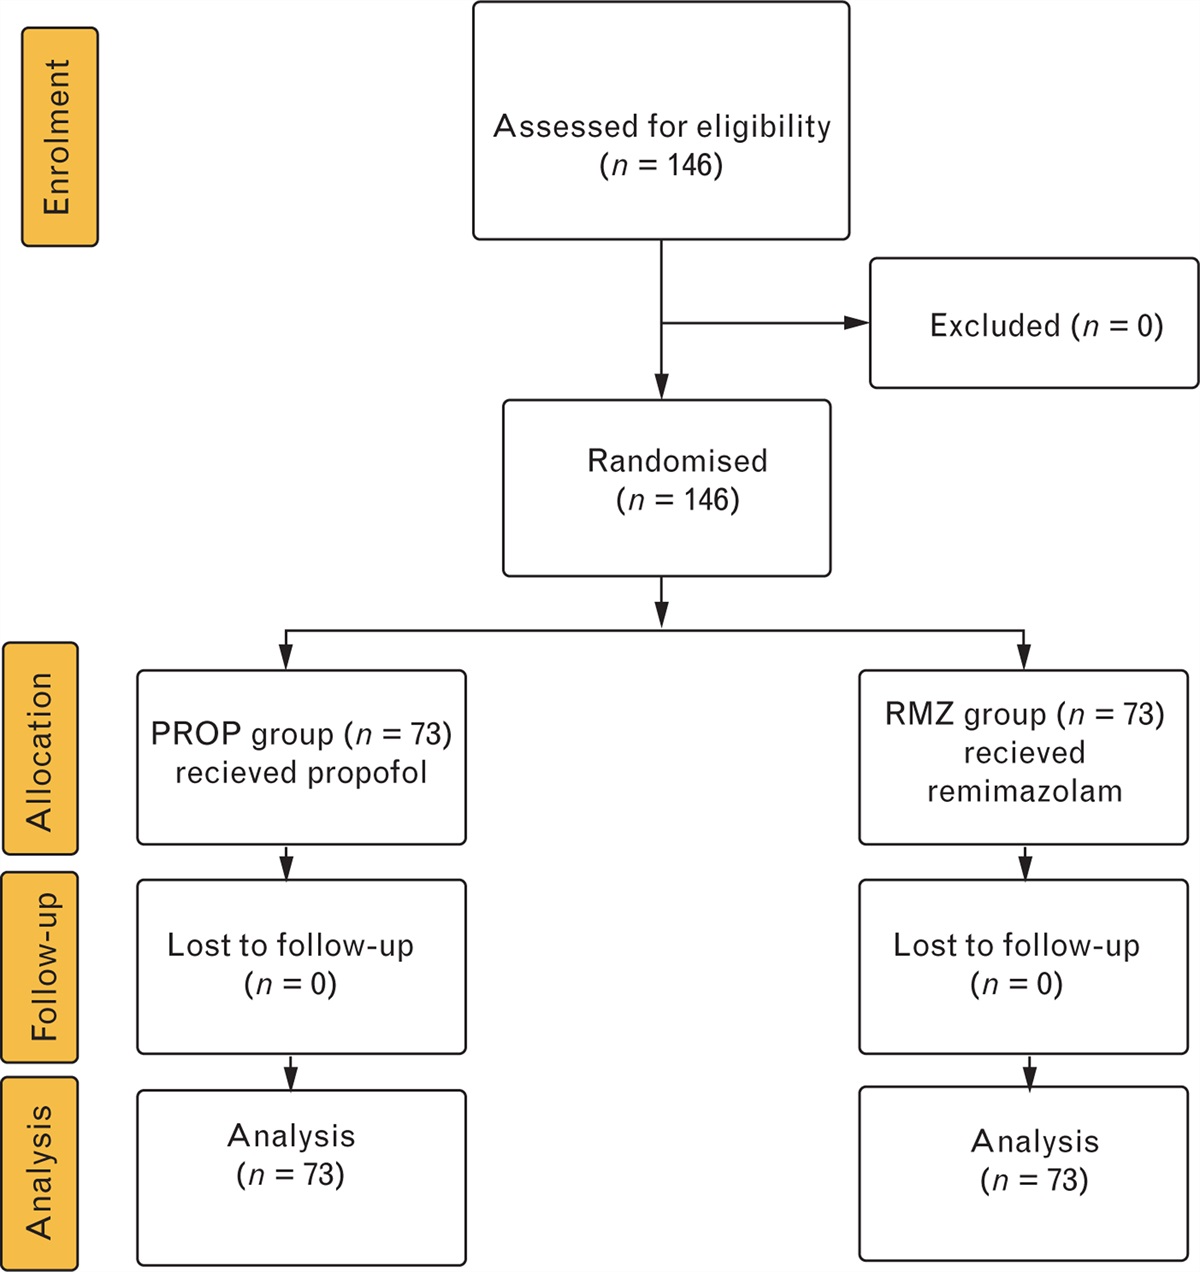 Efficacy of remimazolam tosilate versus propofol for total intravenous anaesthesia in urological surgery: A randomised clinical trial